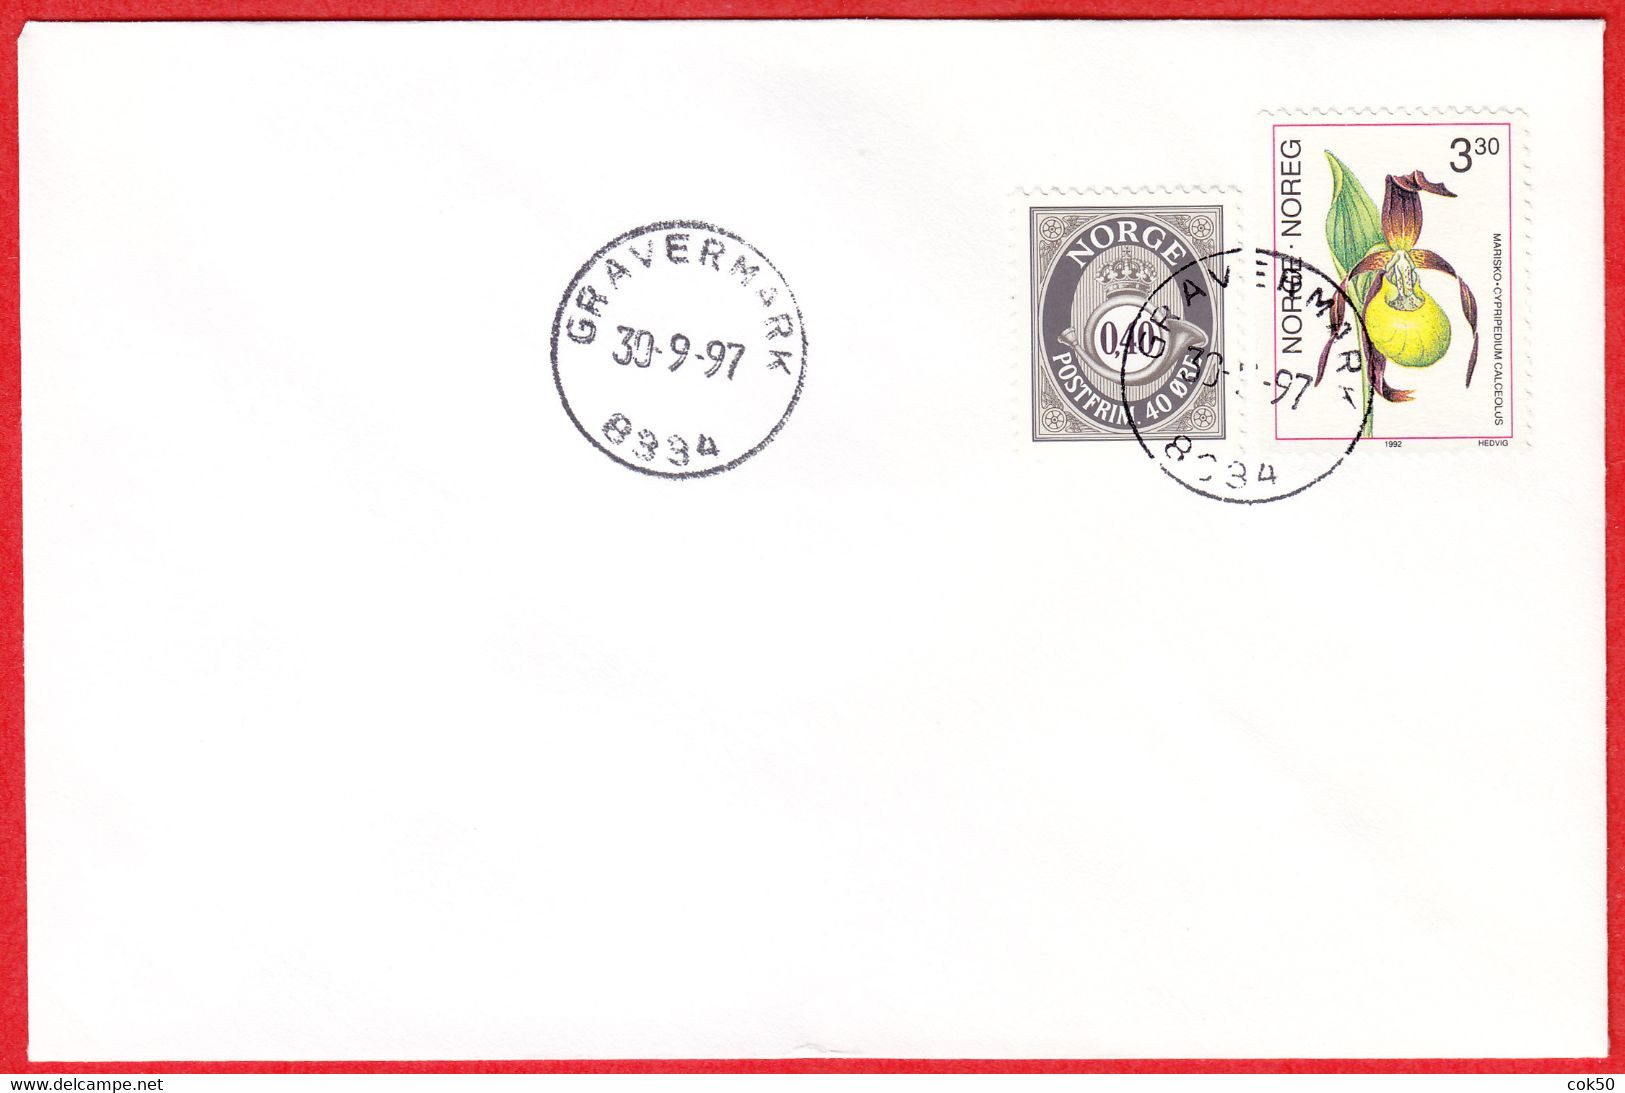 NORWAY -  8334 GRAVERMARK - (Nordland County) - Last Day/postoffice Closed On 1997.09.30 - Local Post Stamps